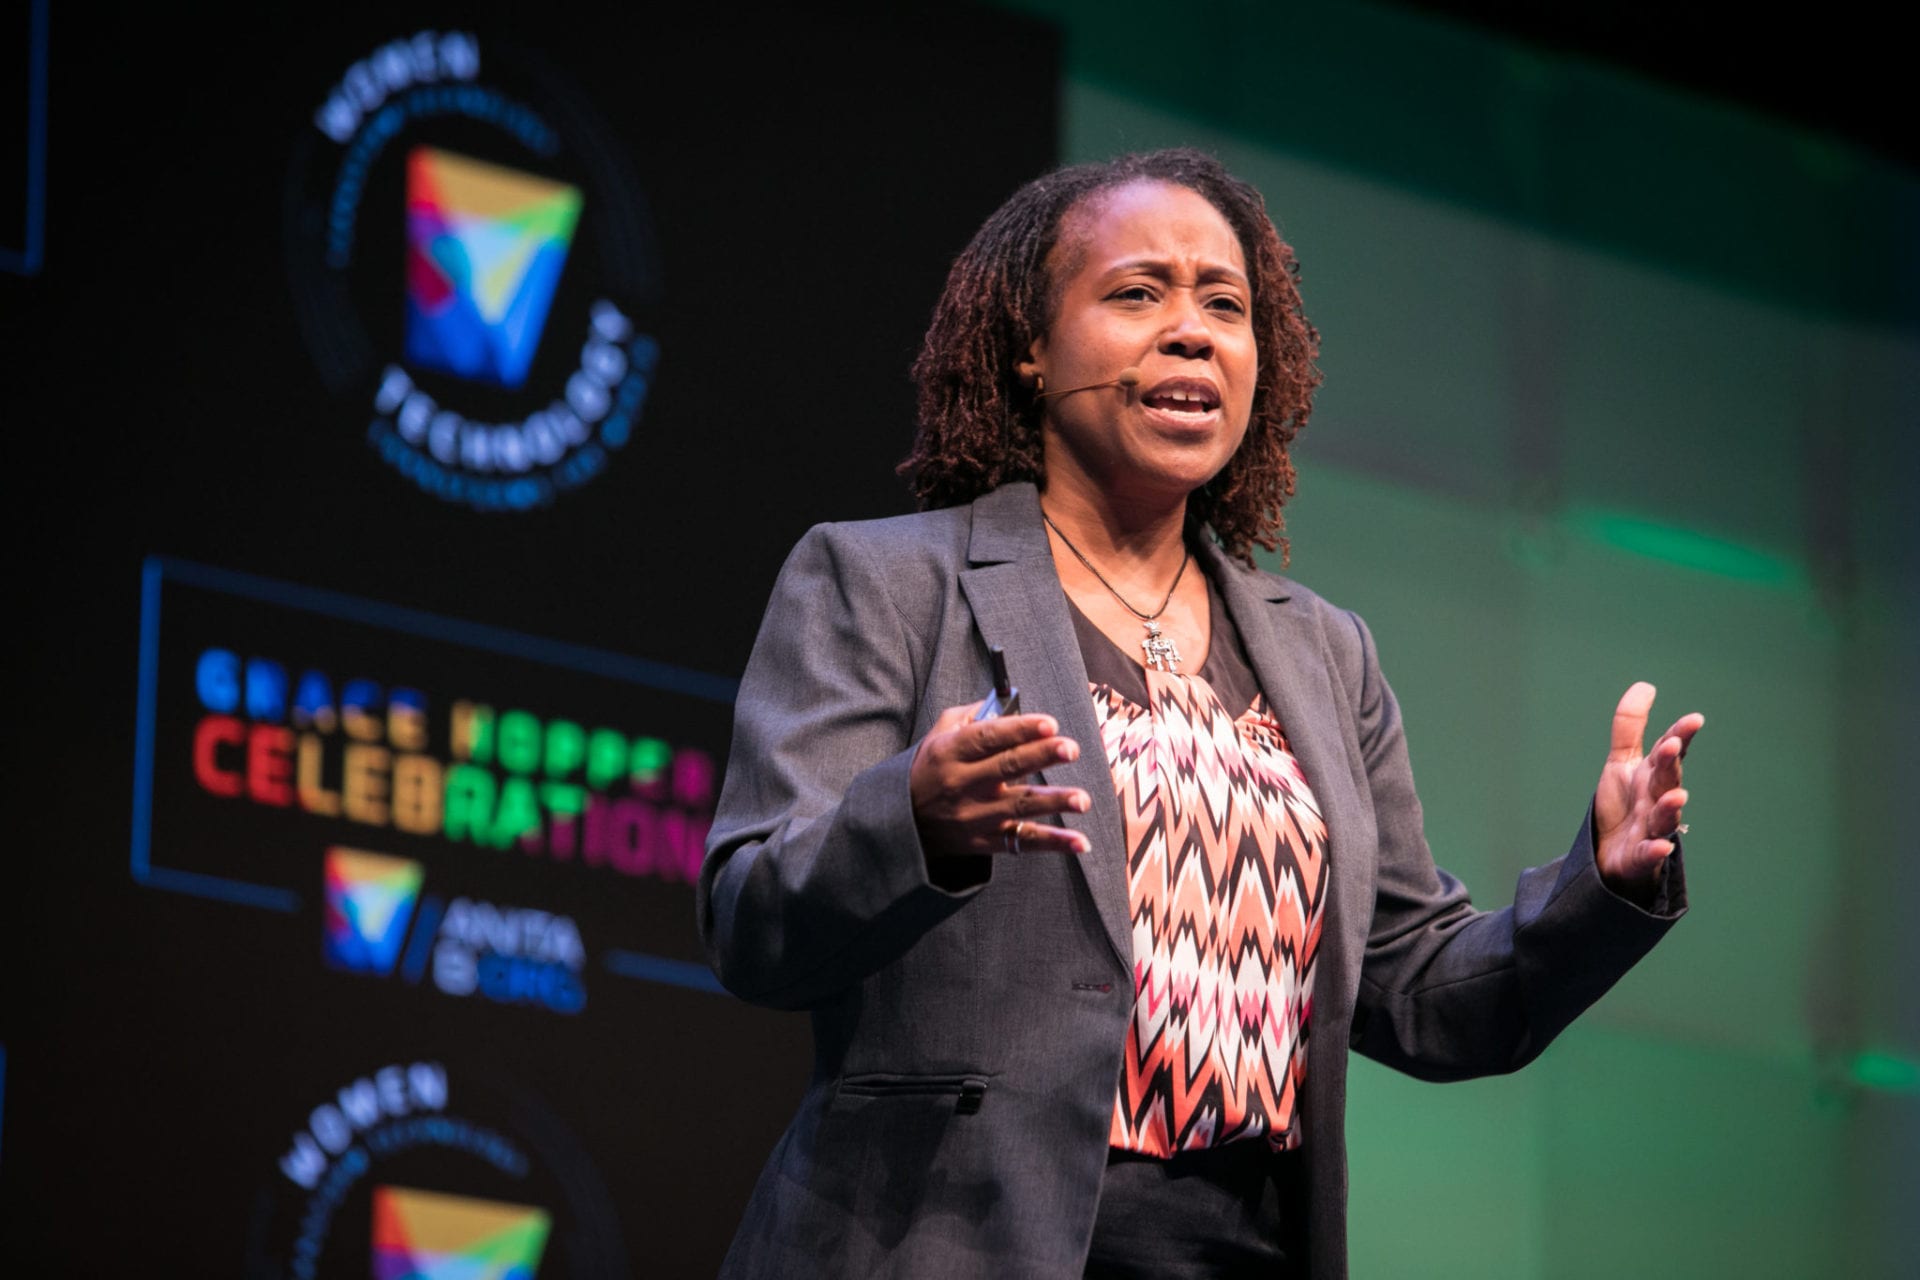 Dr. Ayanna Howard stands and gives her speech on the main stage at the GHC 17 Friday Keynote